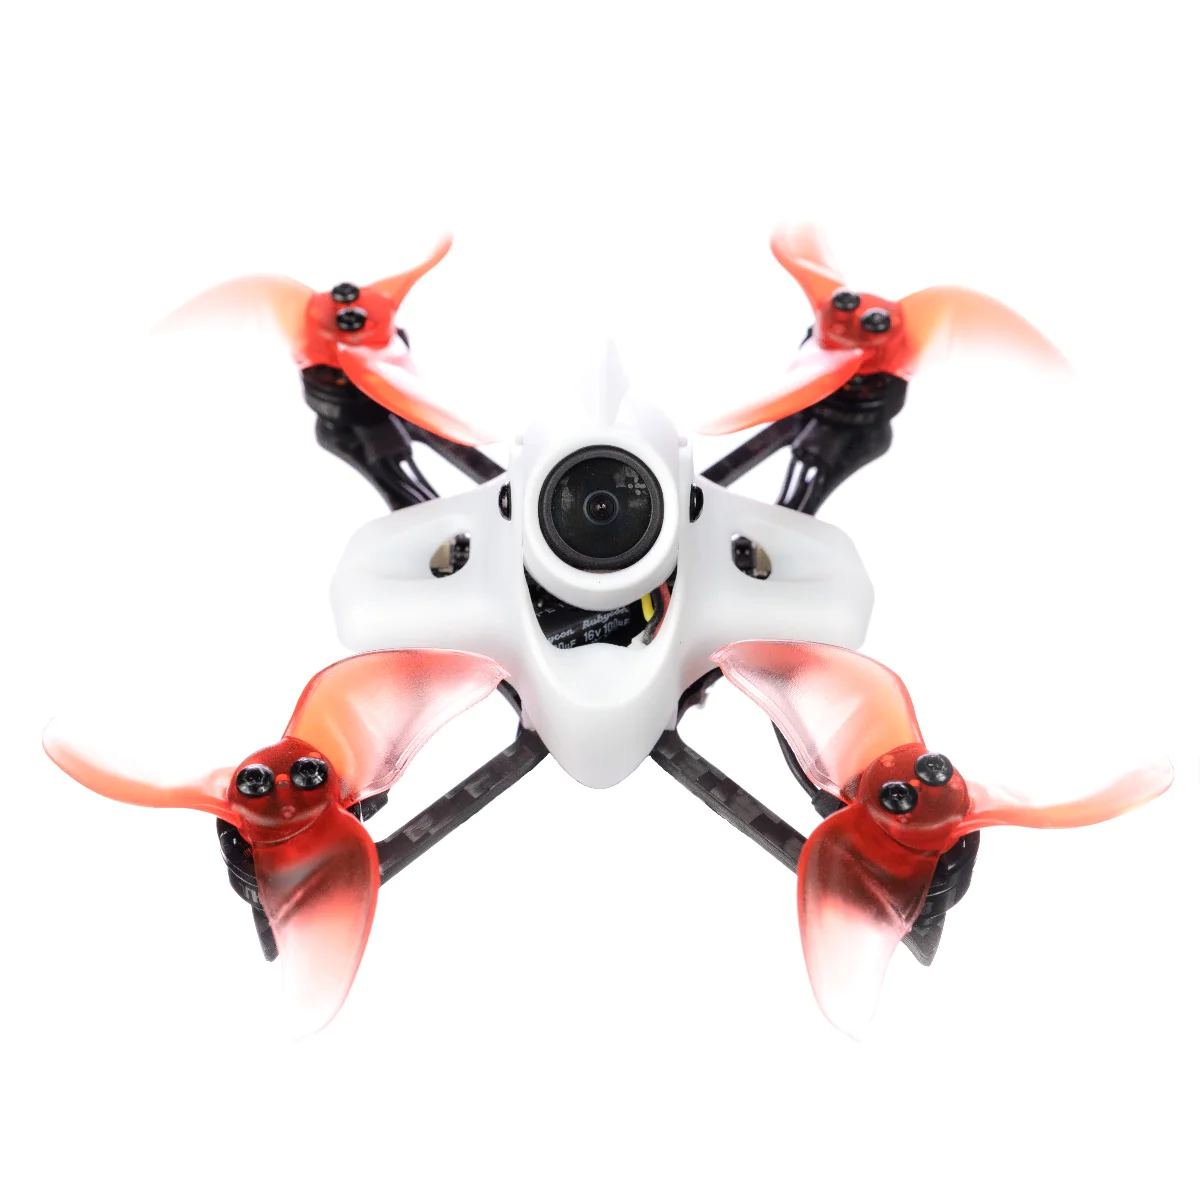 Emax Tinyhawk II, Tiny Whoop, FPV Racing Drone, Drone for Beginners, Pros and Cons, Alternative Products